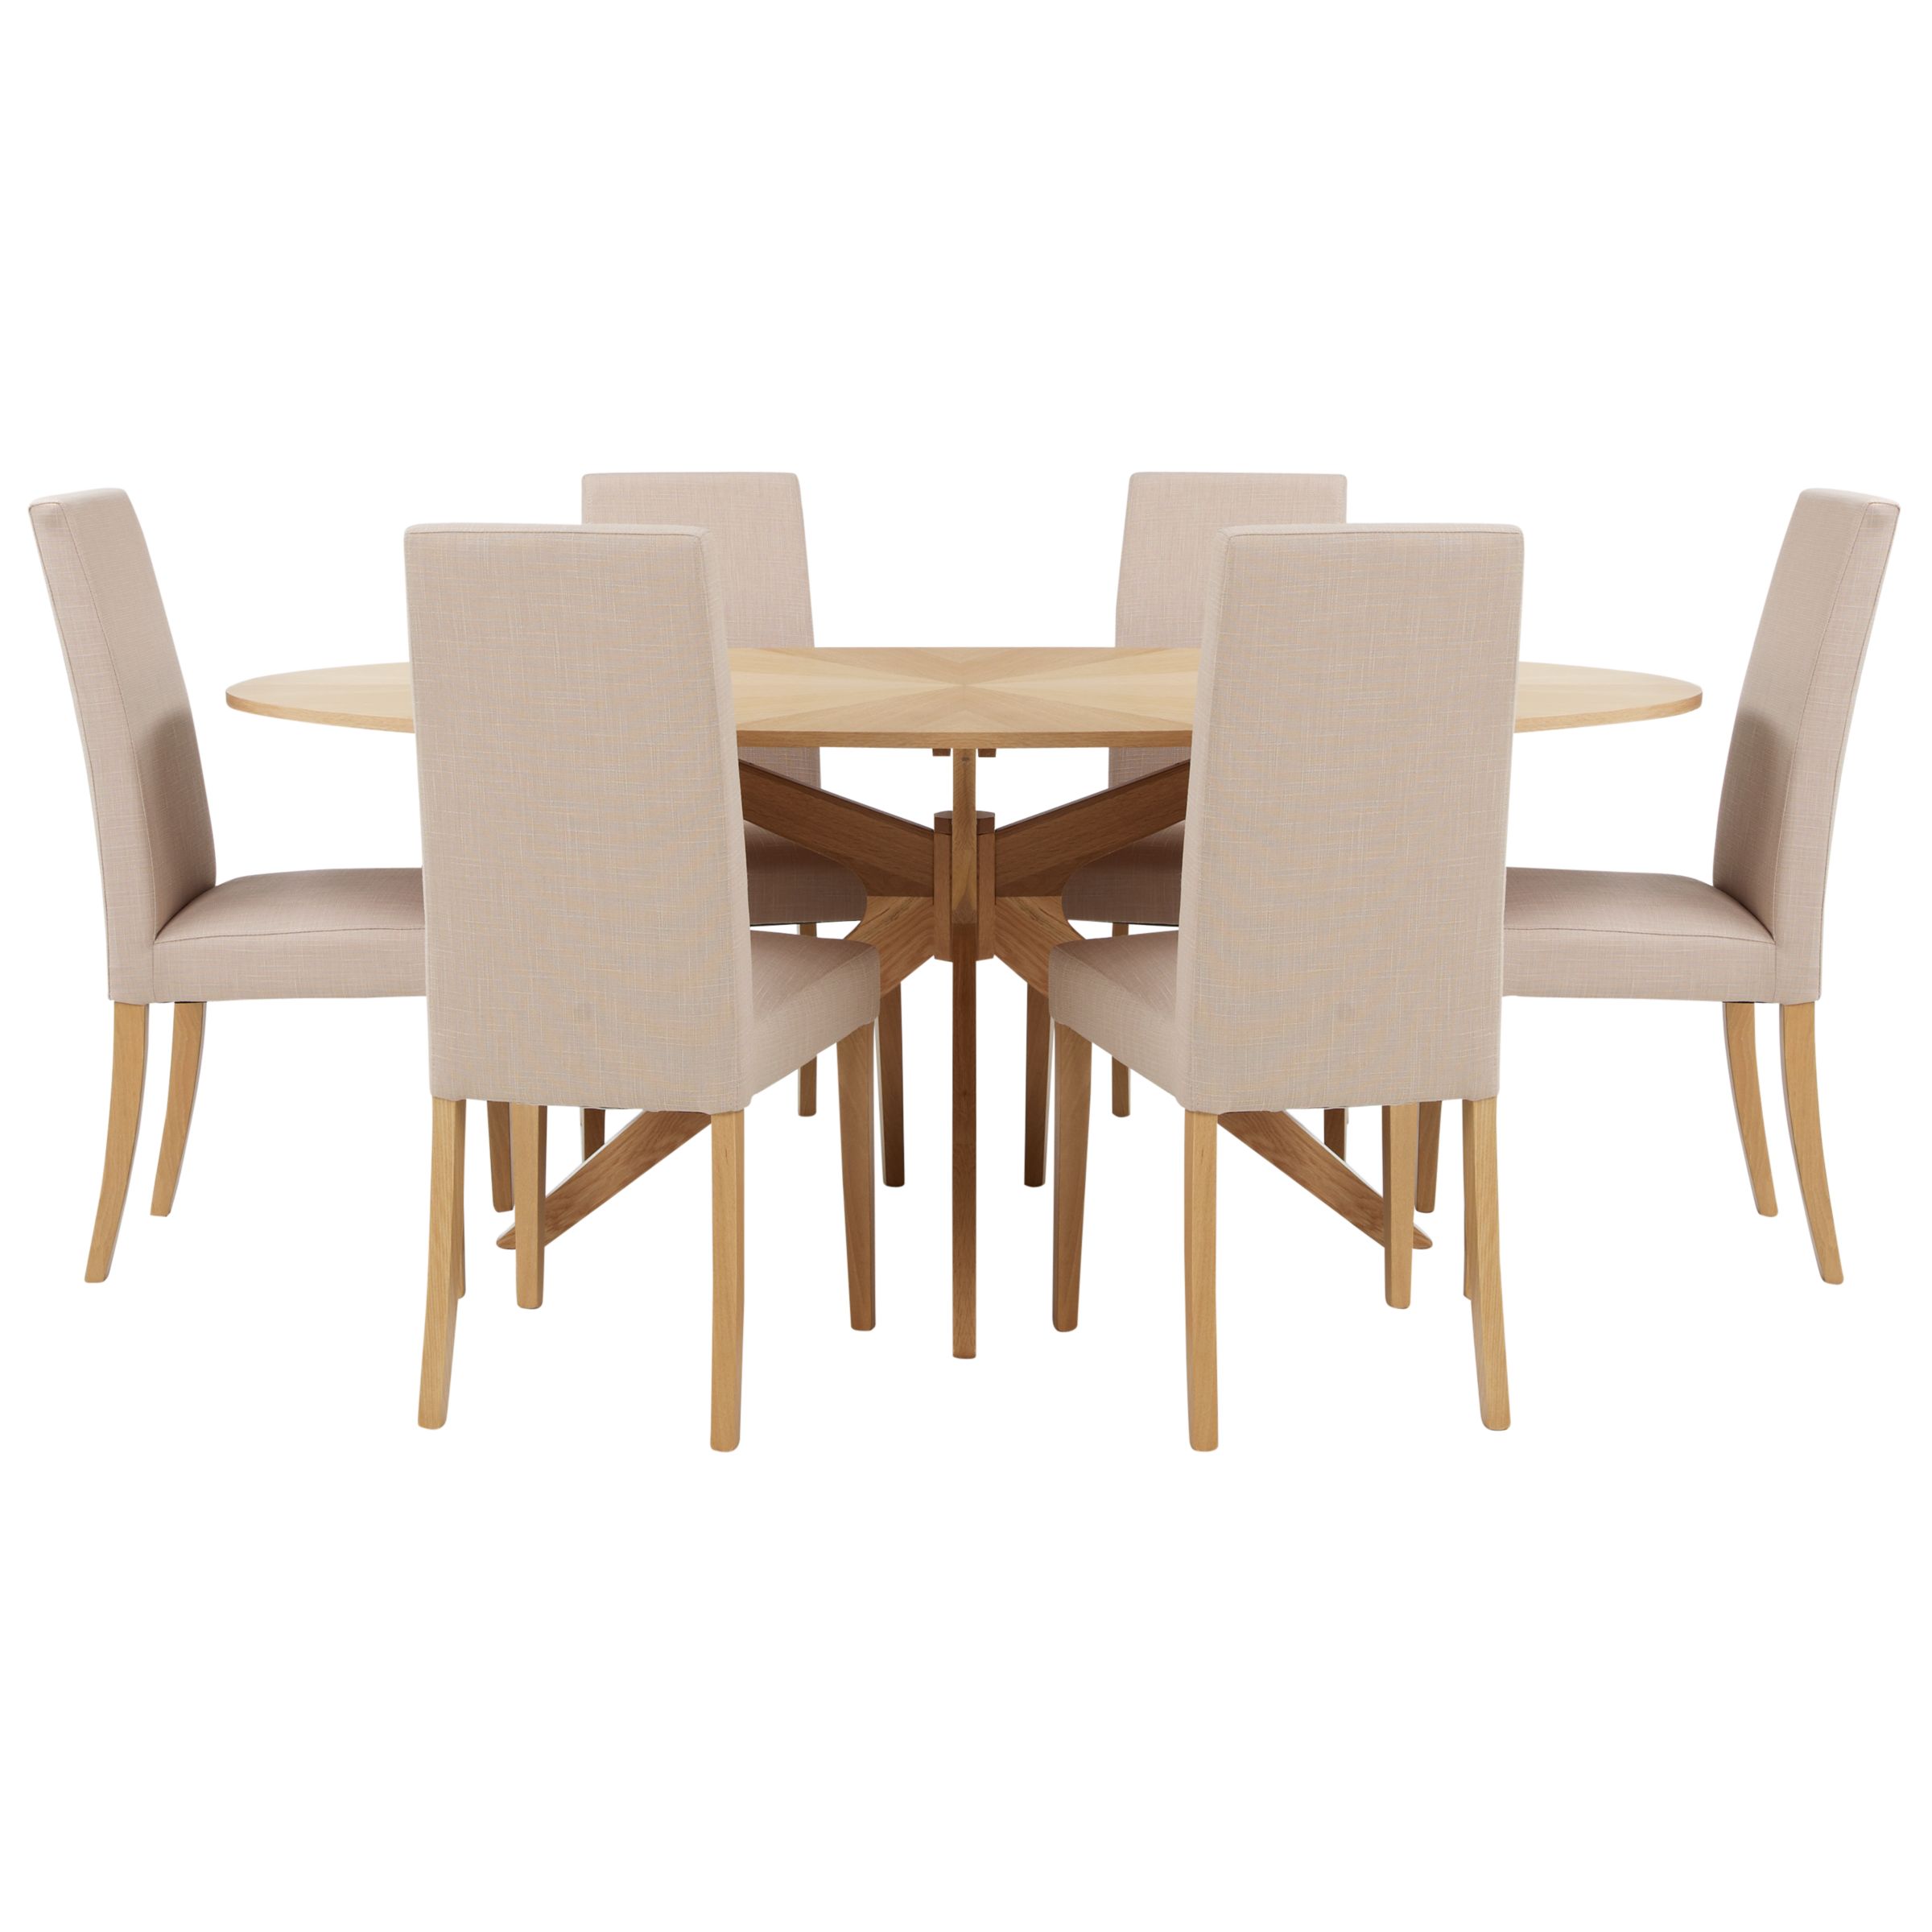 John Lewis Rigby Large Dining Table and 6 Lydia Chairs in Fawn, width 190cm